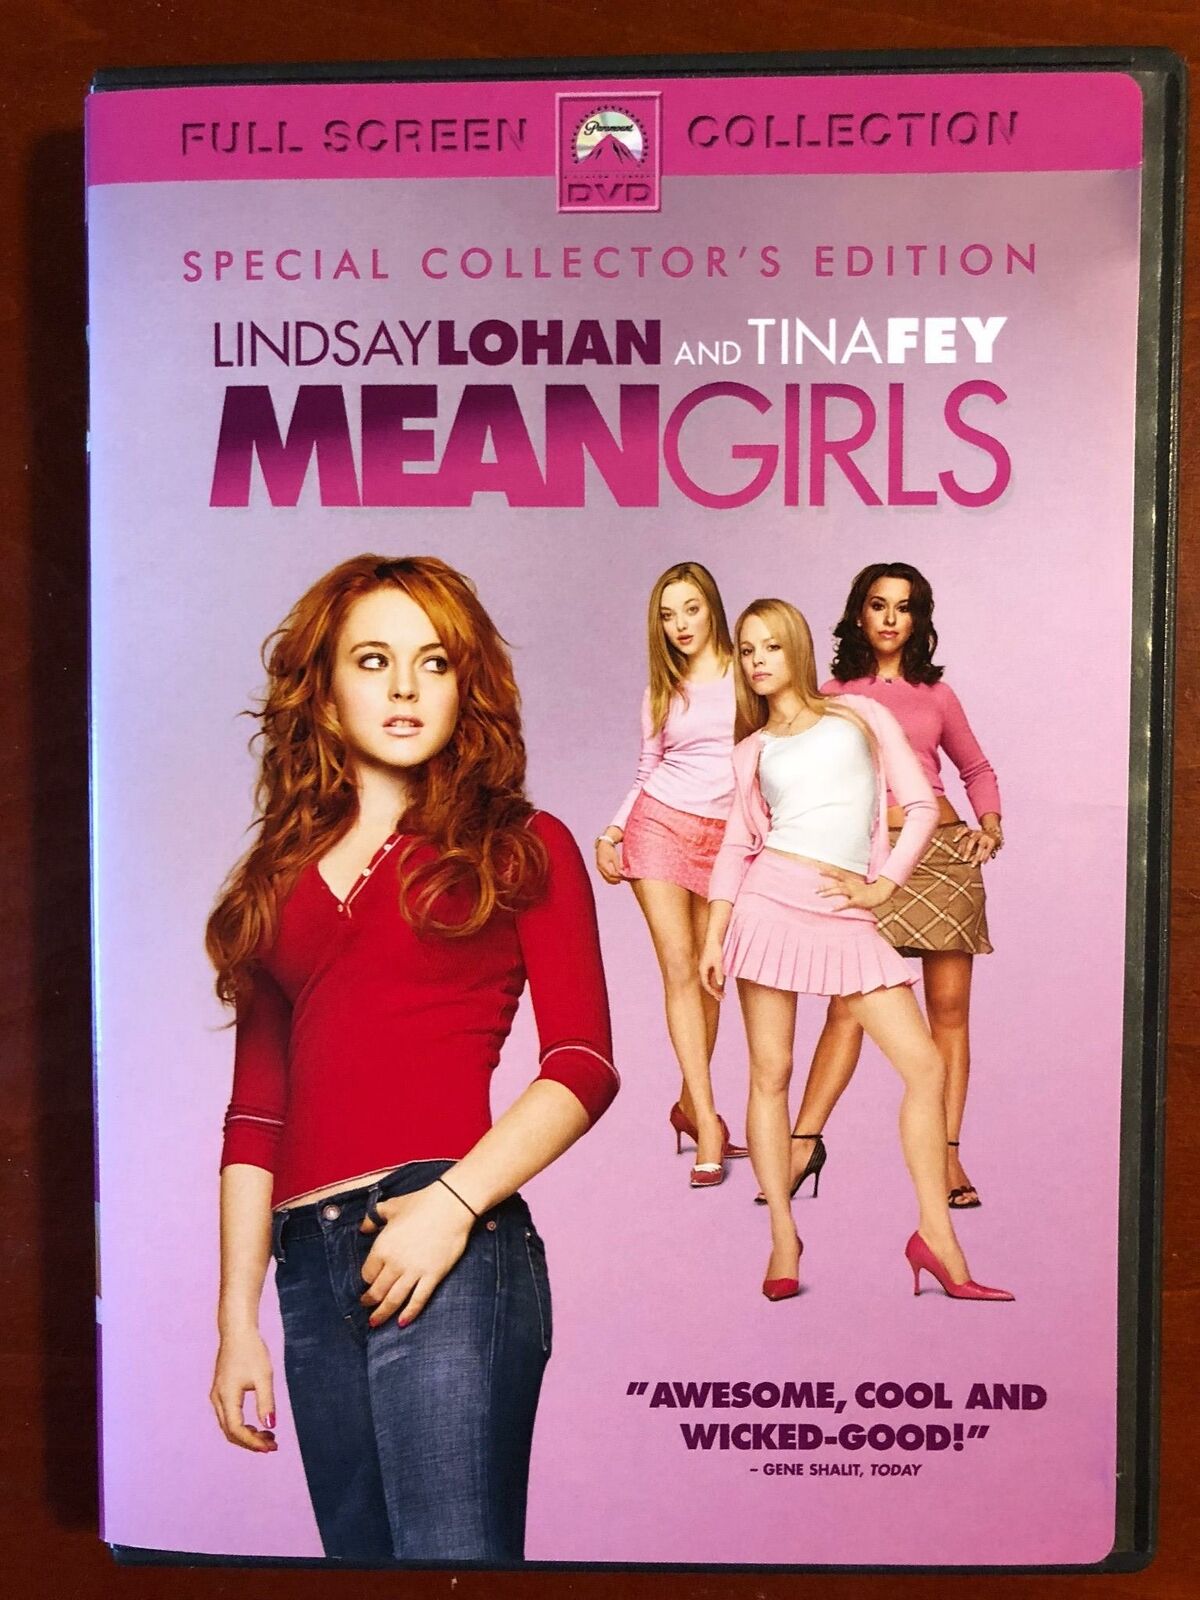 Mean Girls (DVD, 2004, Full Screen Special Collectors Edition) - G1219